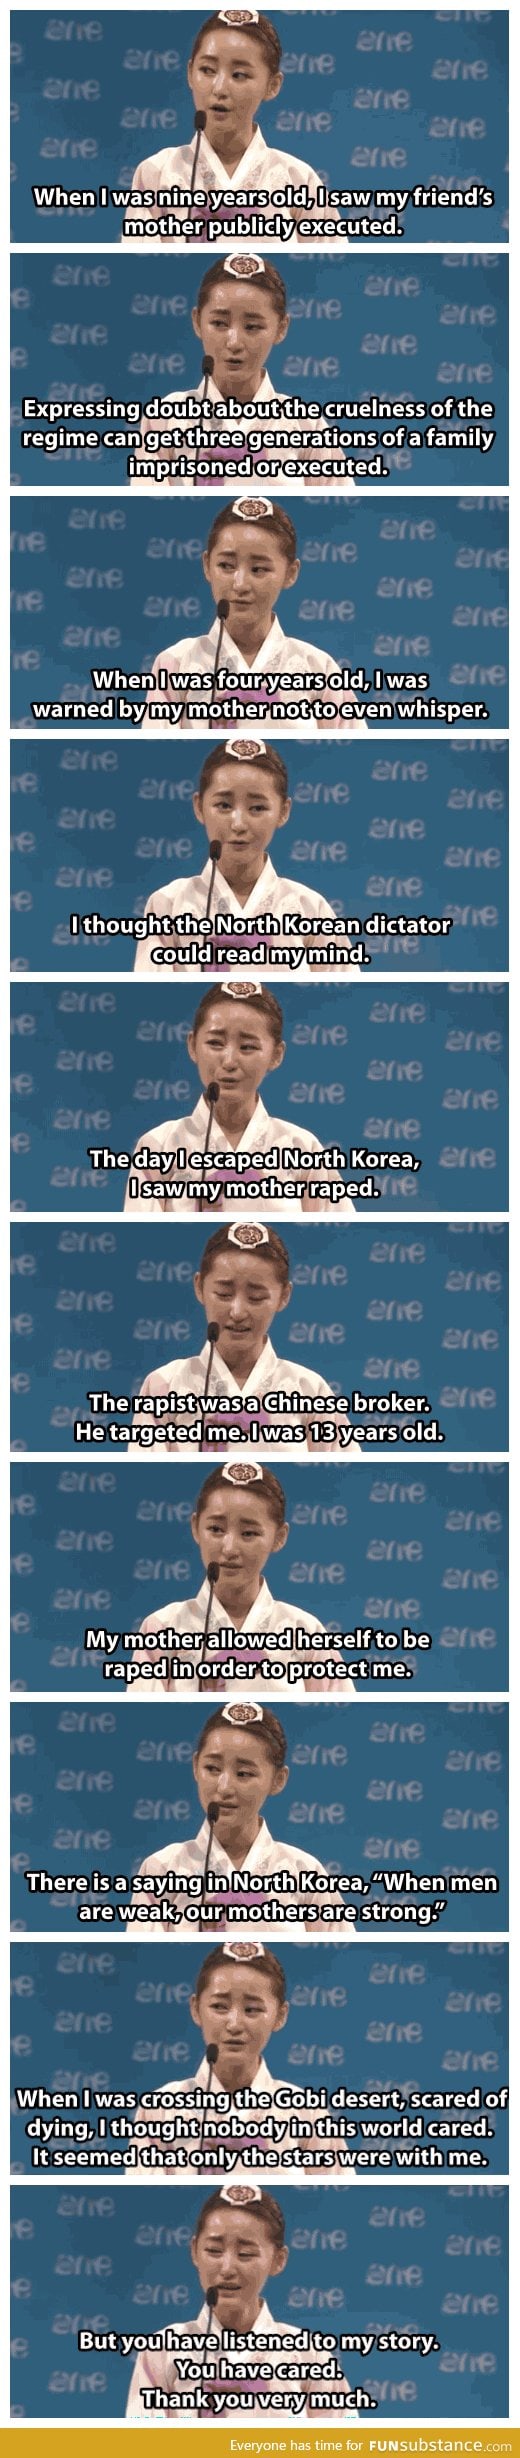 Girl escapes from North Korea